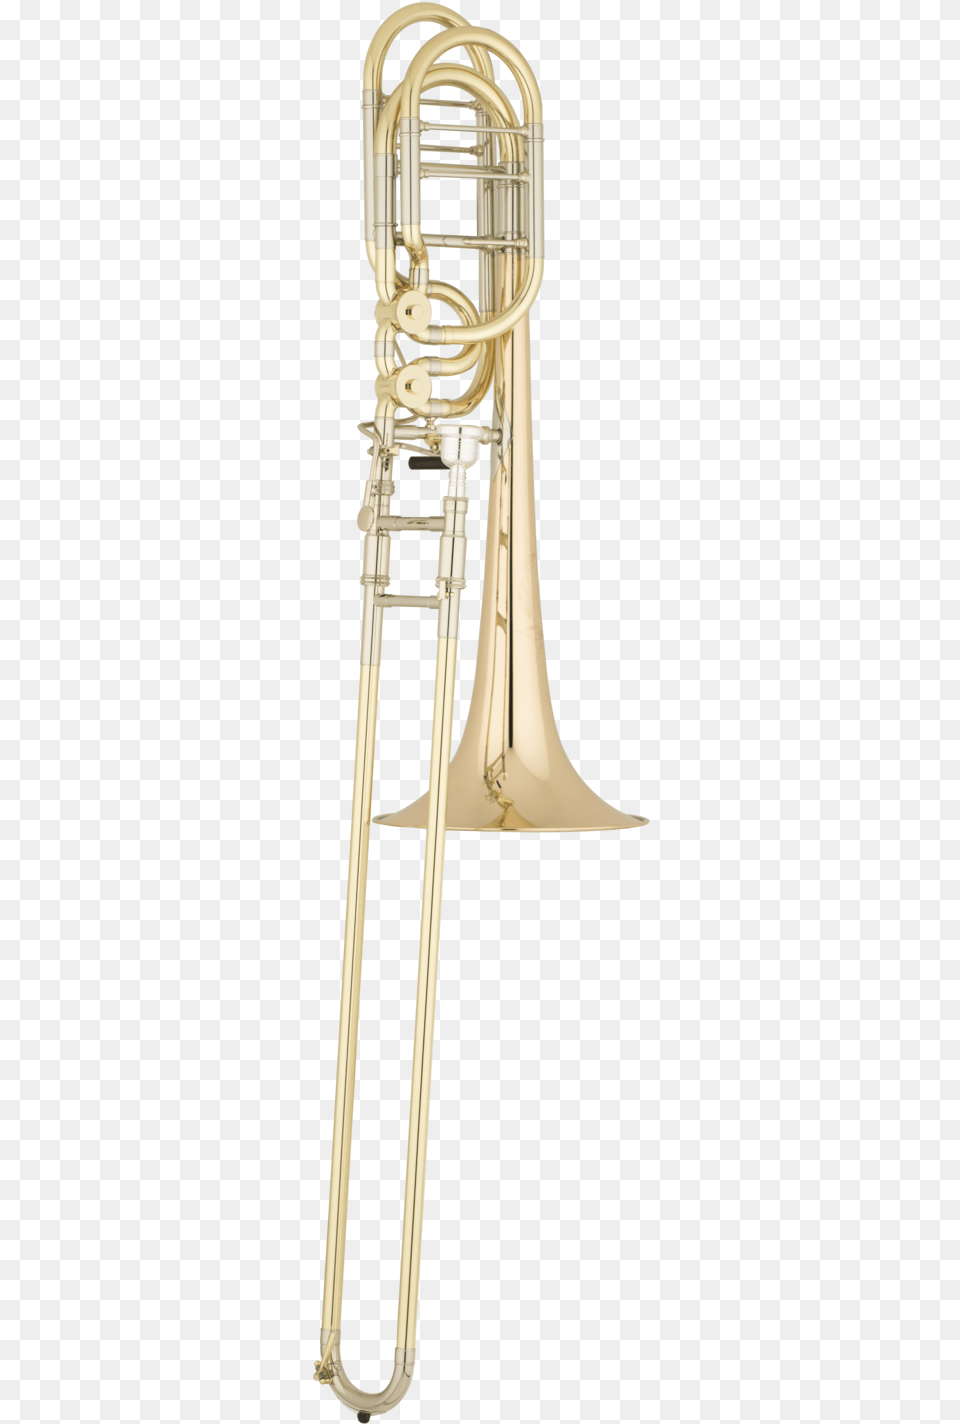 Shires Trombone Tbq36gr Front 0718 Shires Trombone, Musical Instrument, Brass Section, Horn Free Transparent Png